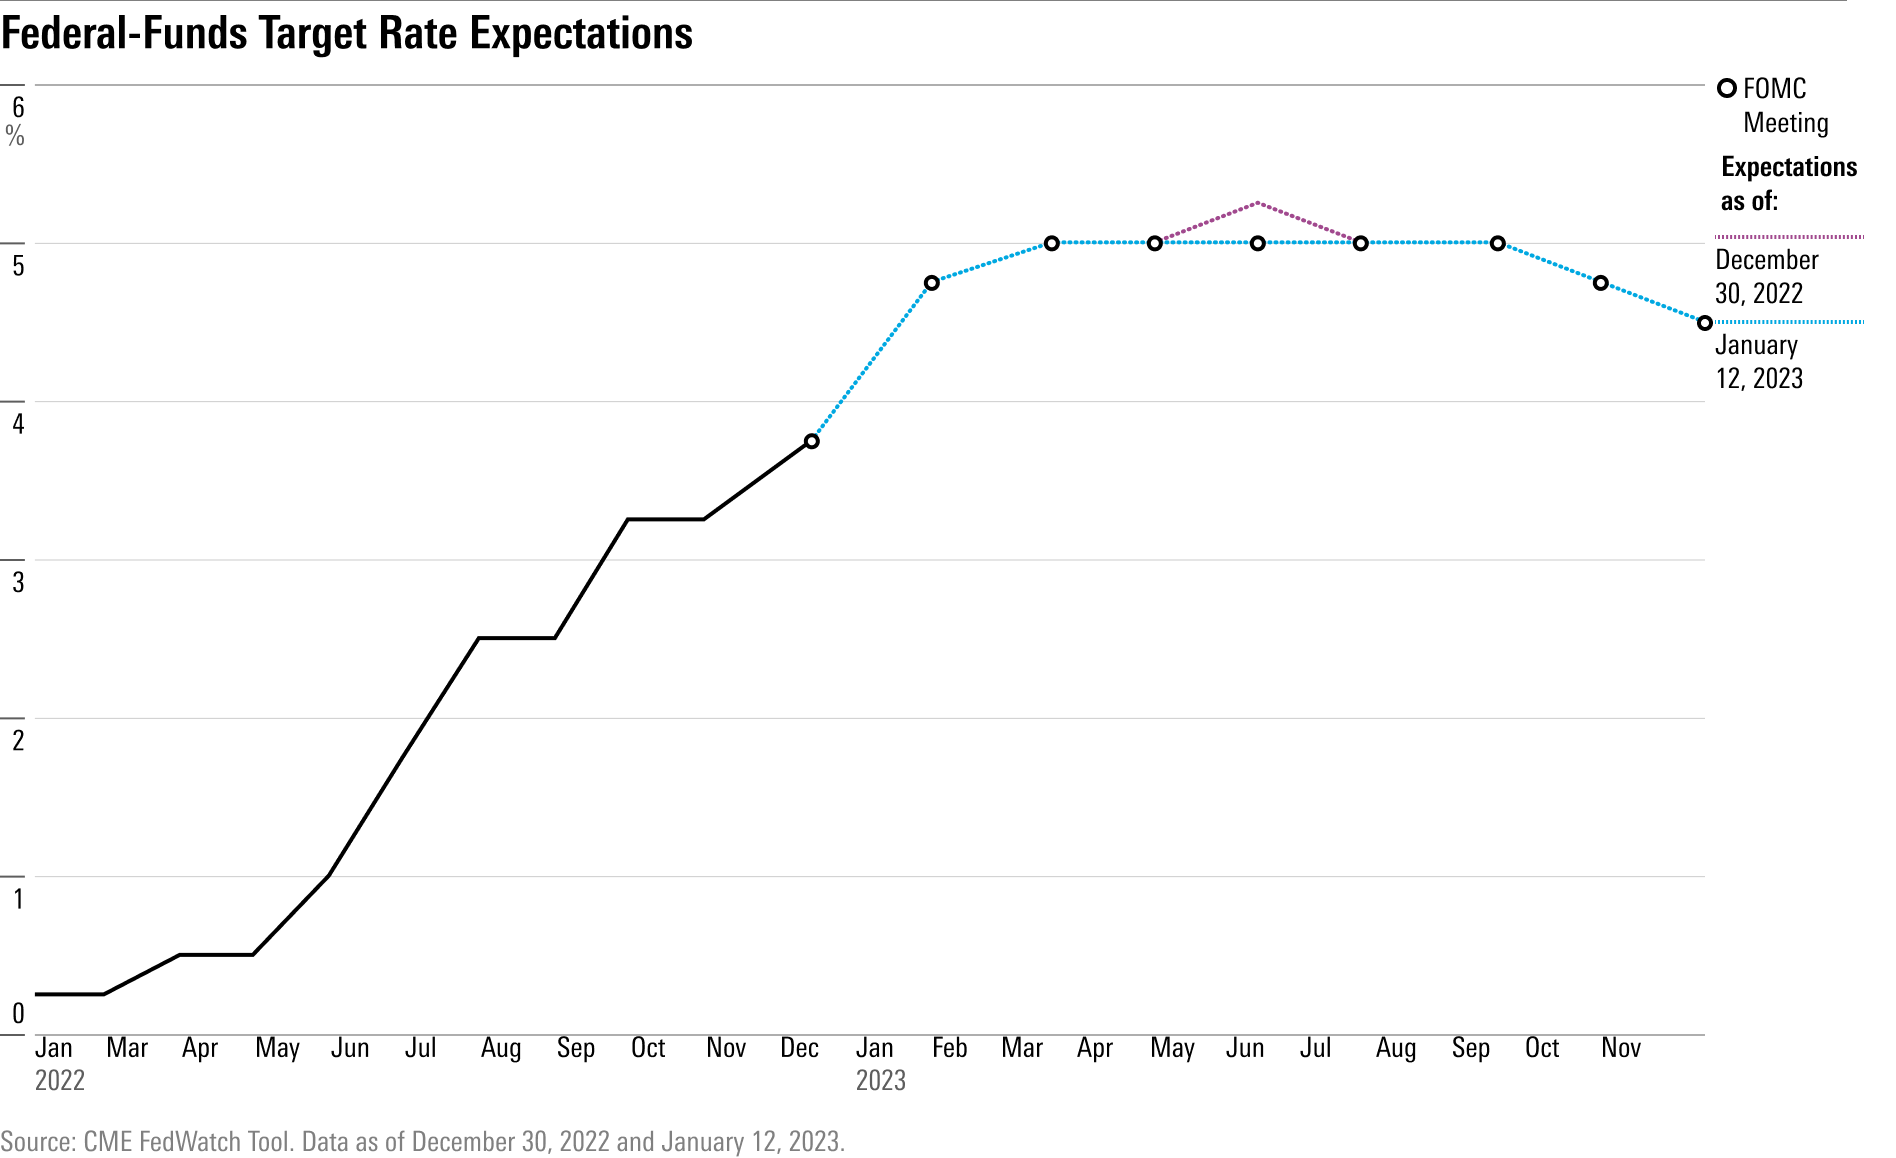 Long-term market expectations of the federal-funds effective rate.